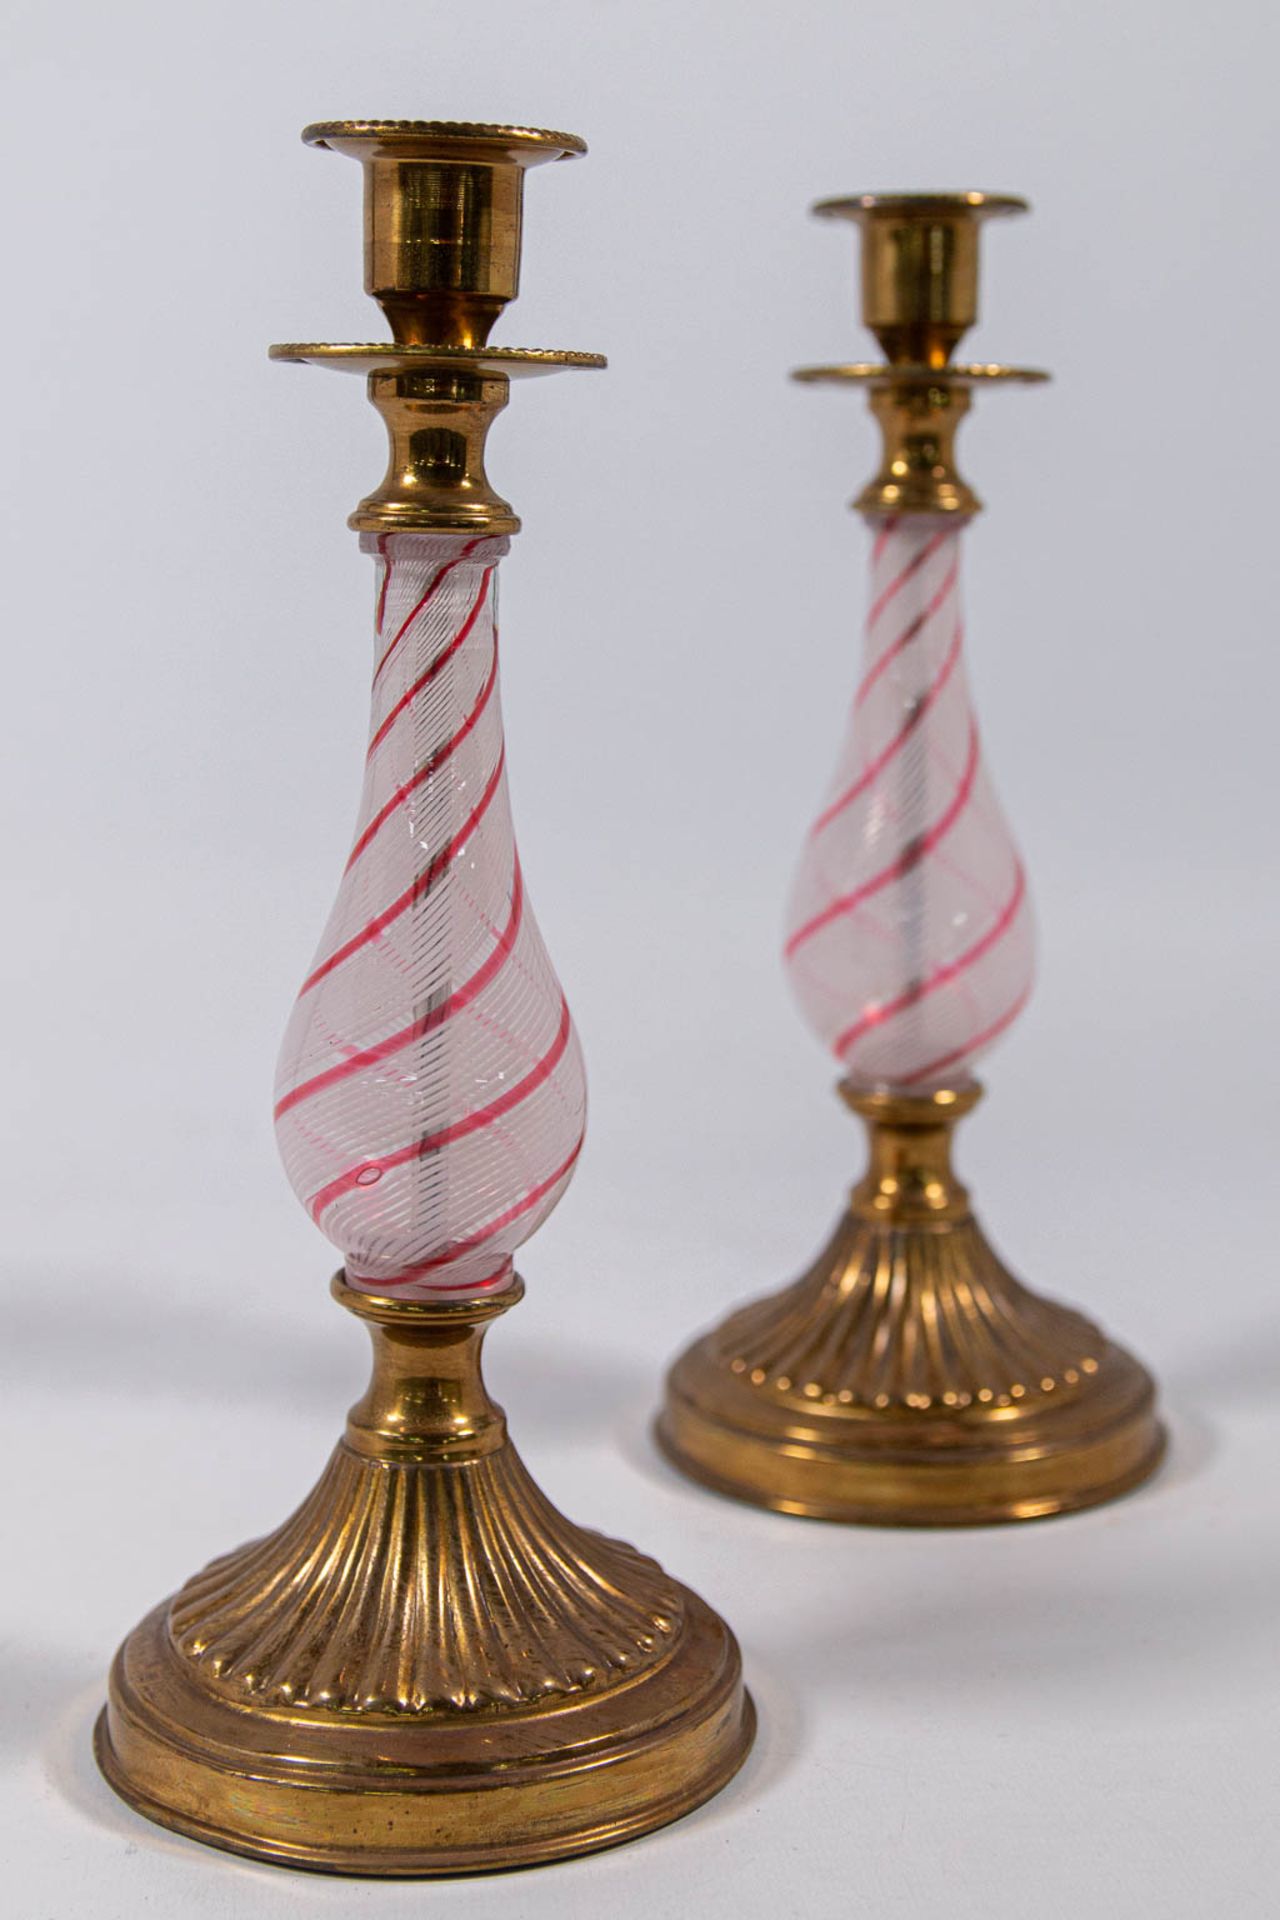 A pair of candlesticks, bronze mounted glass, made in Murano, Italy around 1920. (26 x 11 cm) - Image 7 of 12